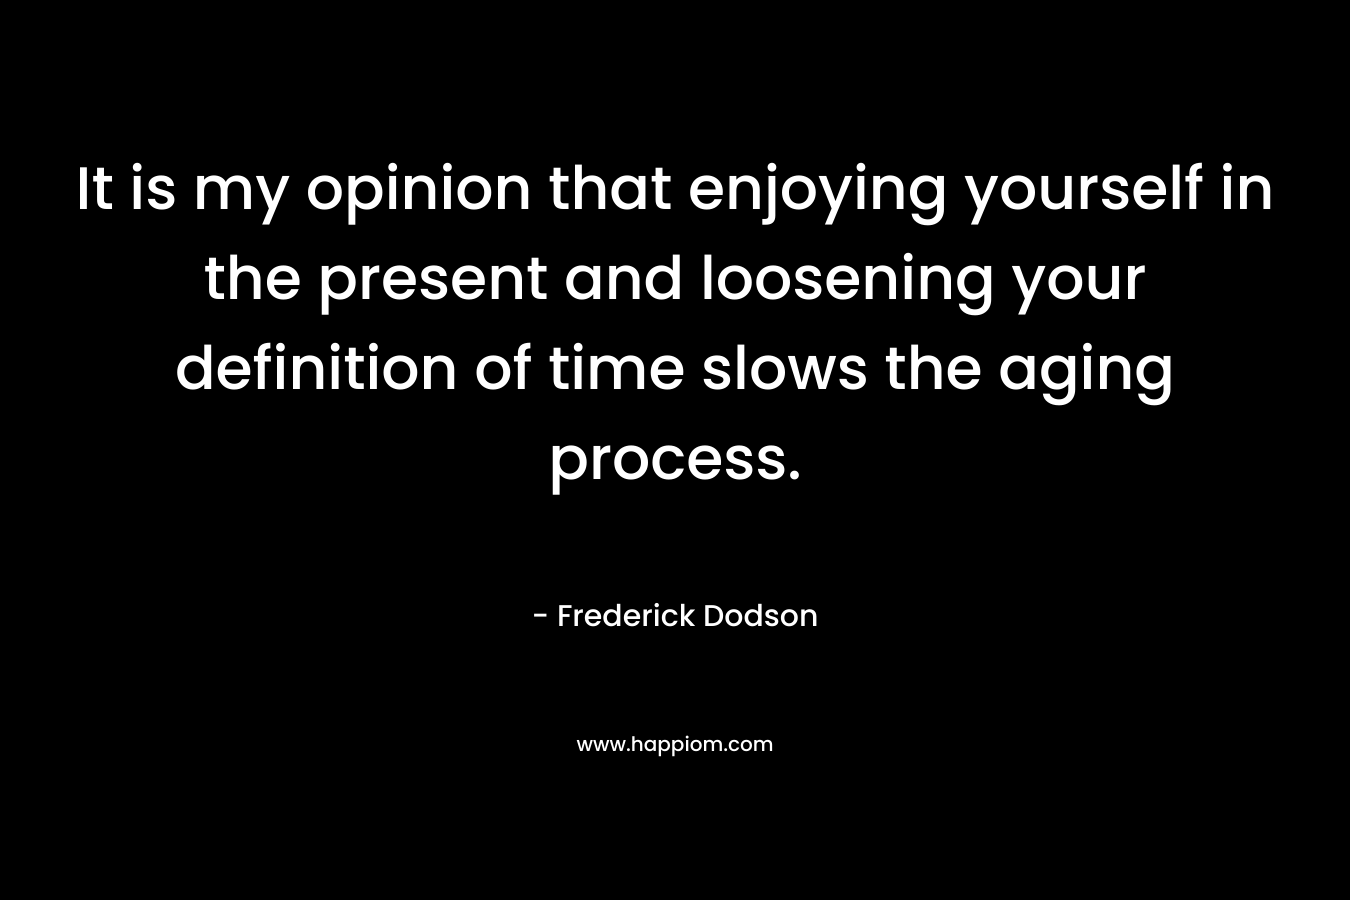 It is my opinion that enjoying yourself in the present and loosening your definition of time slows the aging process. – Frederick Dodson